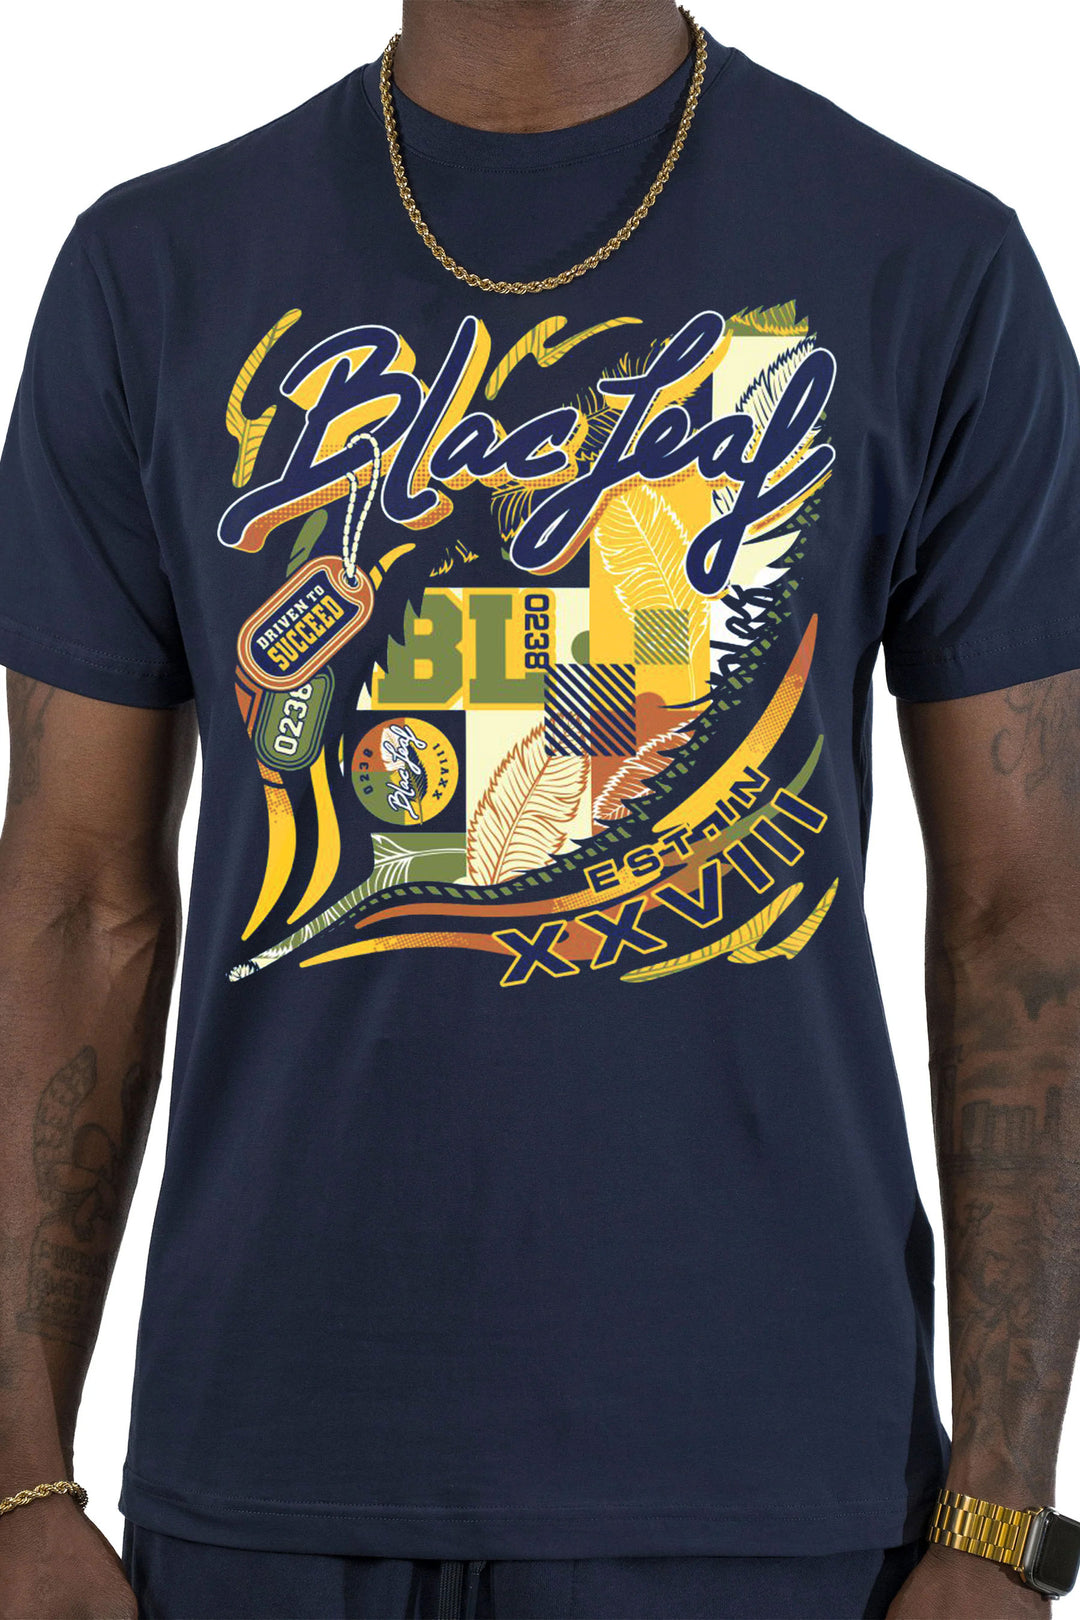 Driven To Succeed Navy Shirt